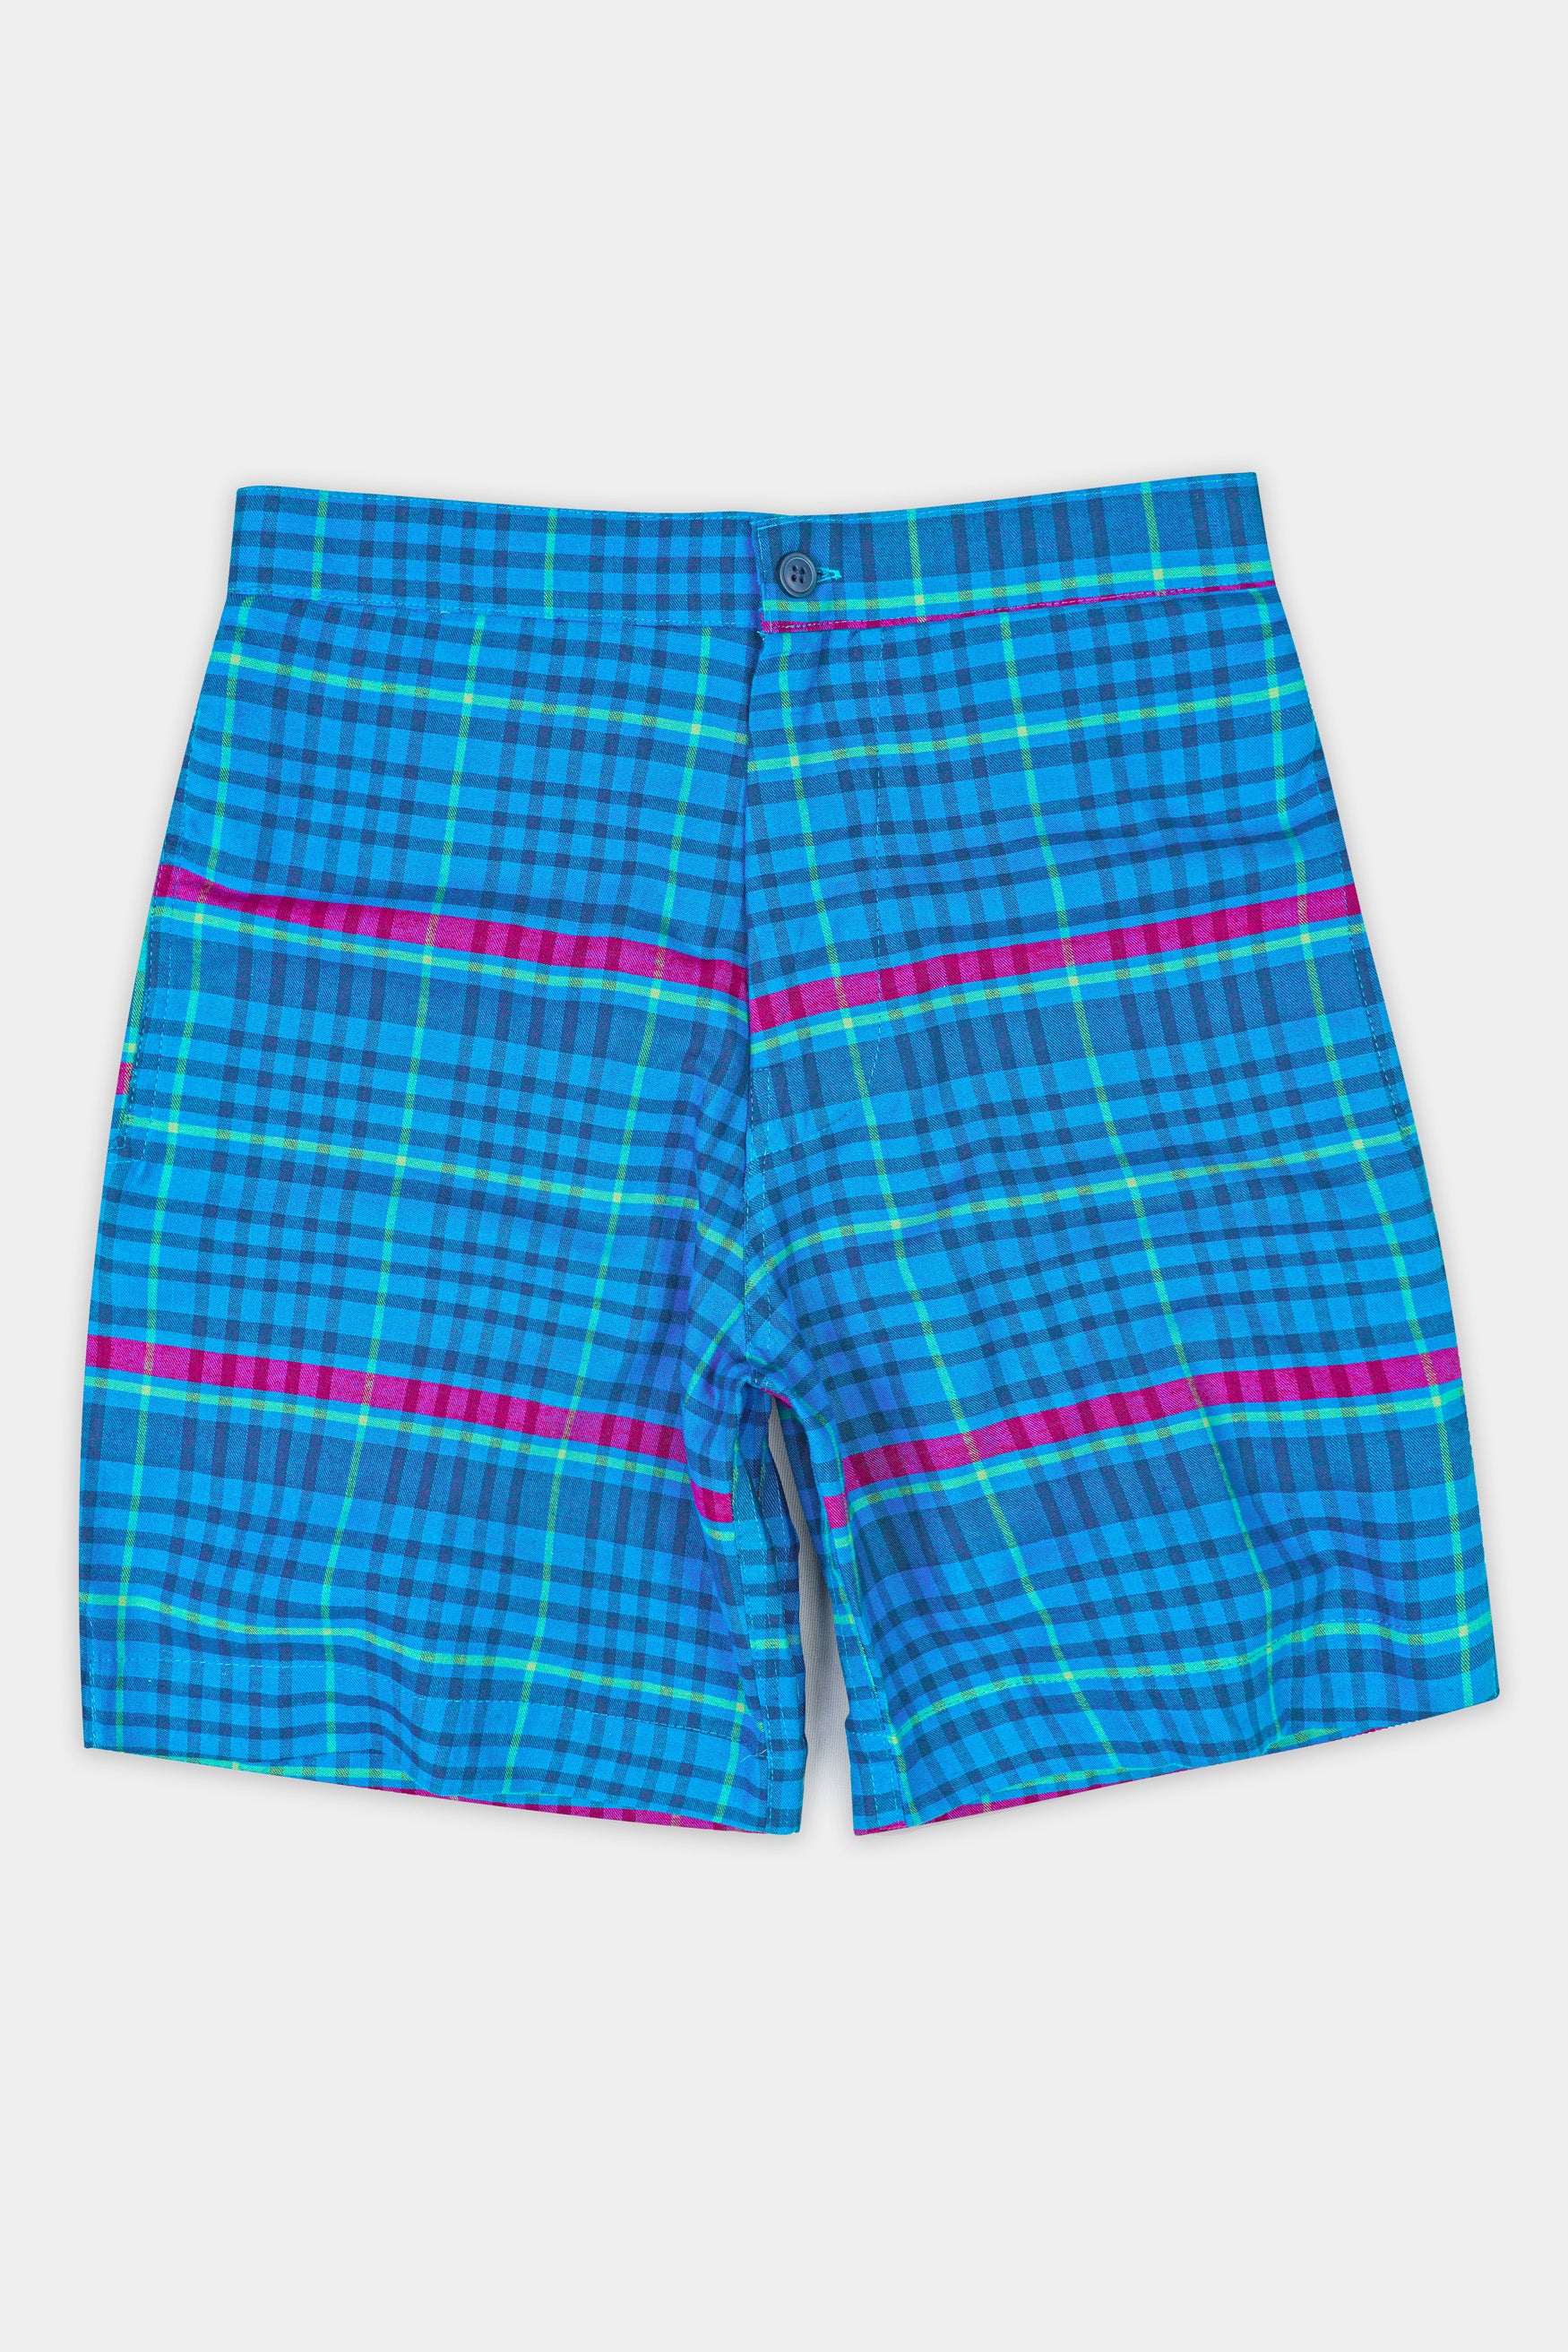 Curious Blue with Barney Pink Multicolor Checkered Chambray Shorts SR363-28, SR363-30, SR363-32, SR363-34, SR363-36, SR363-38, SR363-40, SR363-42, SR363-44